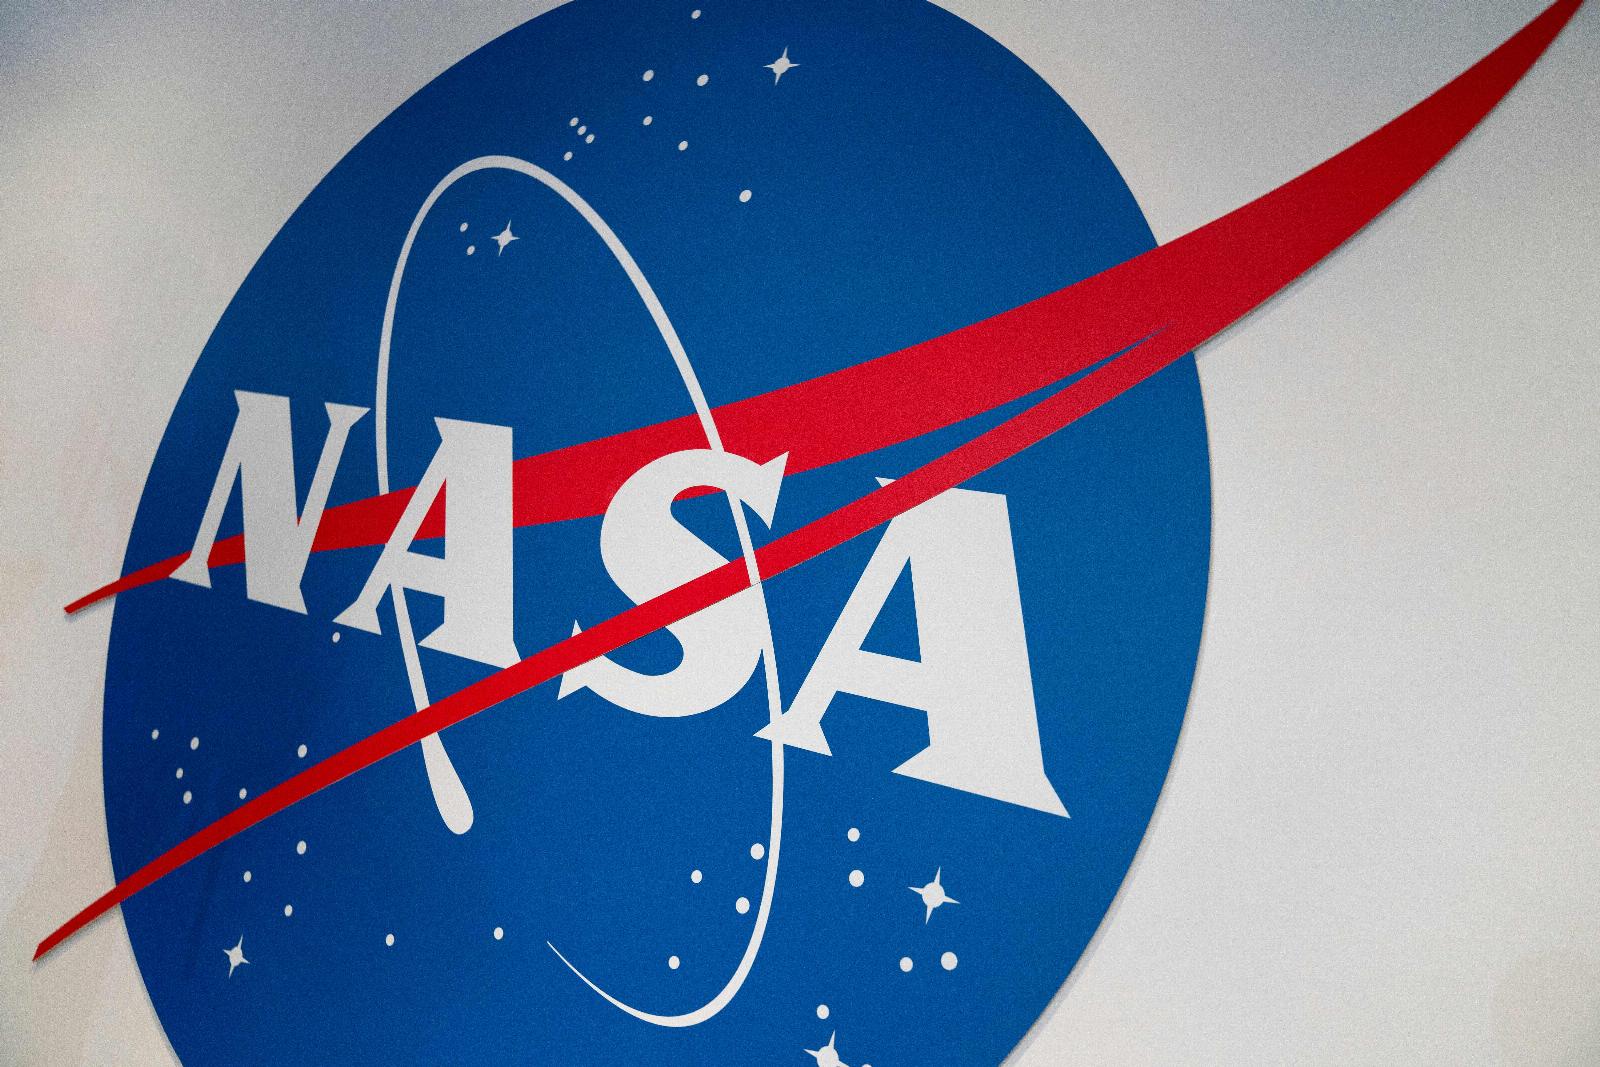 NASA is launching its own streaming service later this year